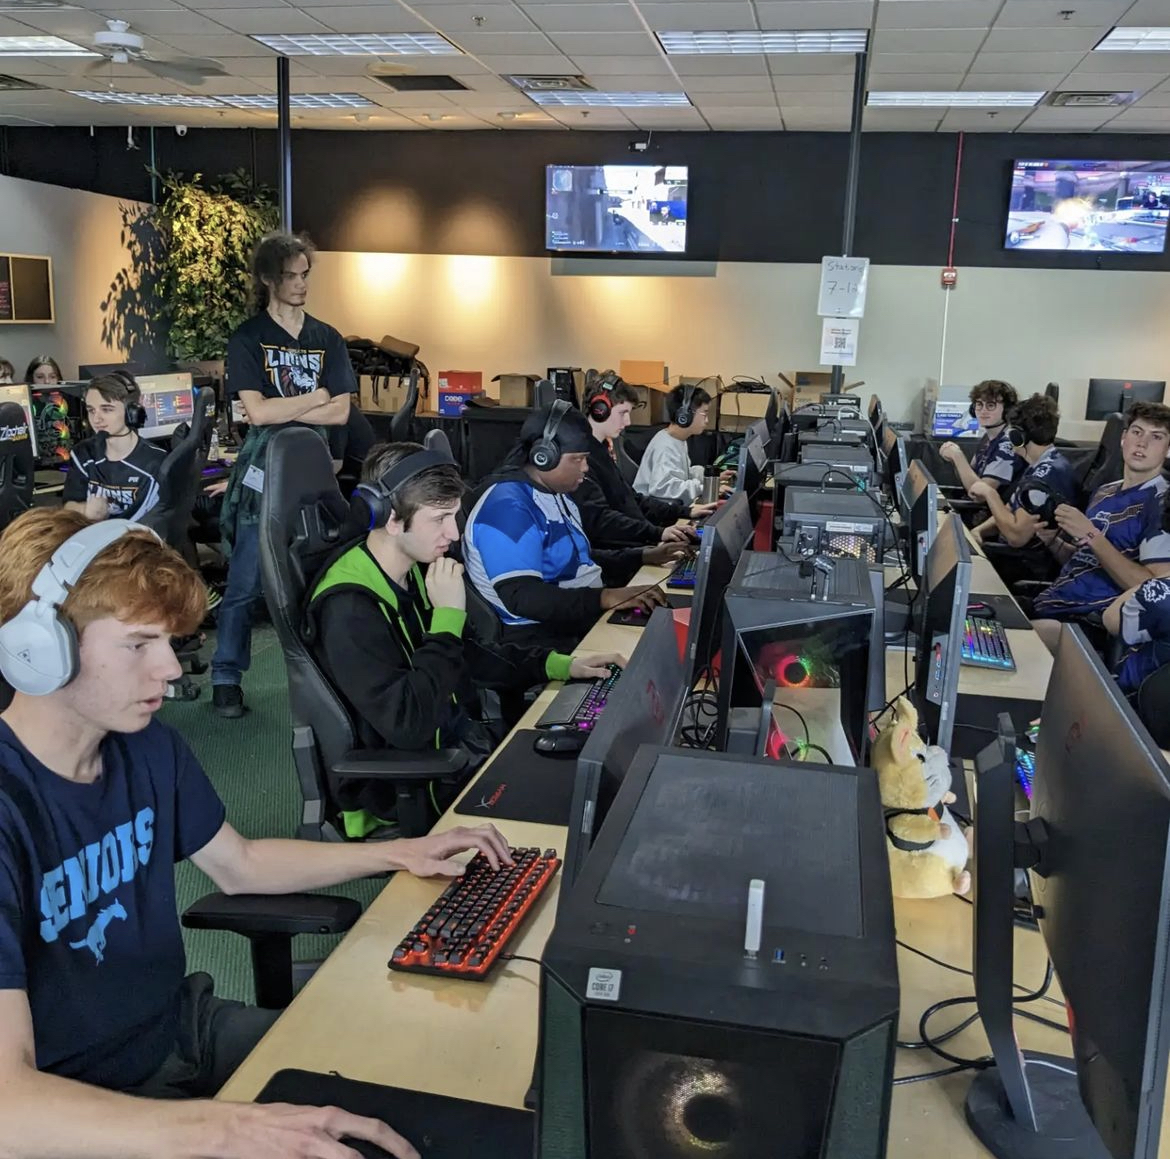 The Overwatch 2 team plays at their first LAN in the IHSEA finals, competing to move on.